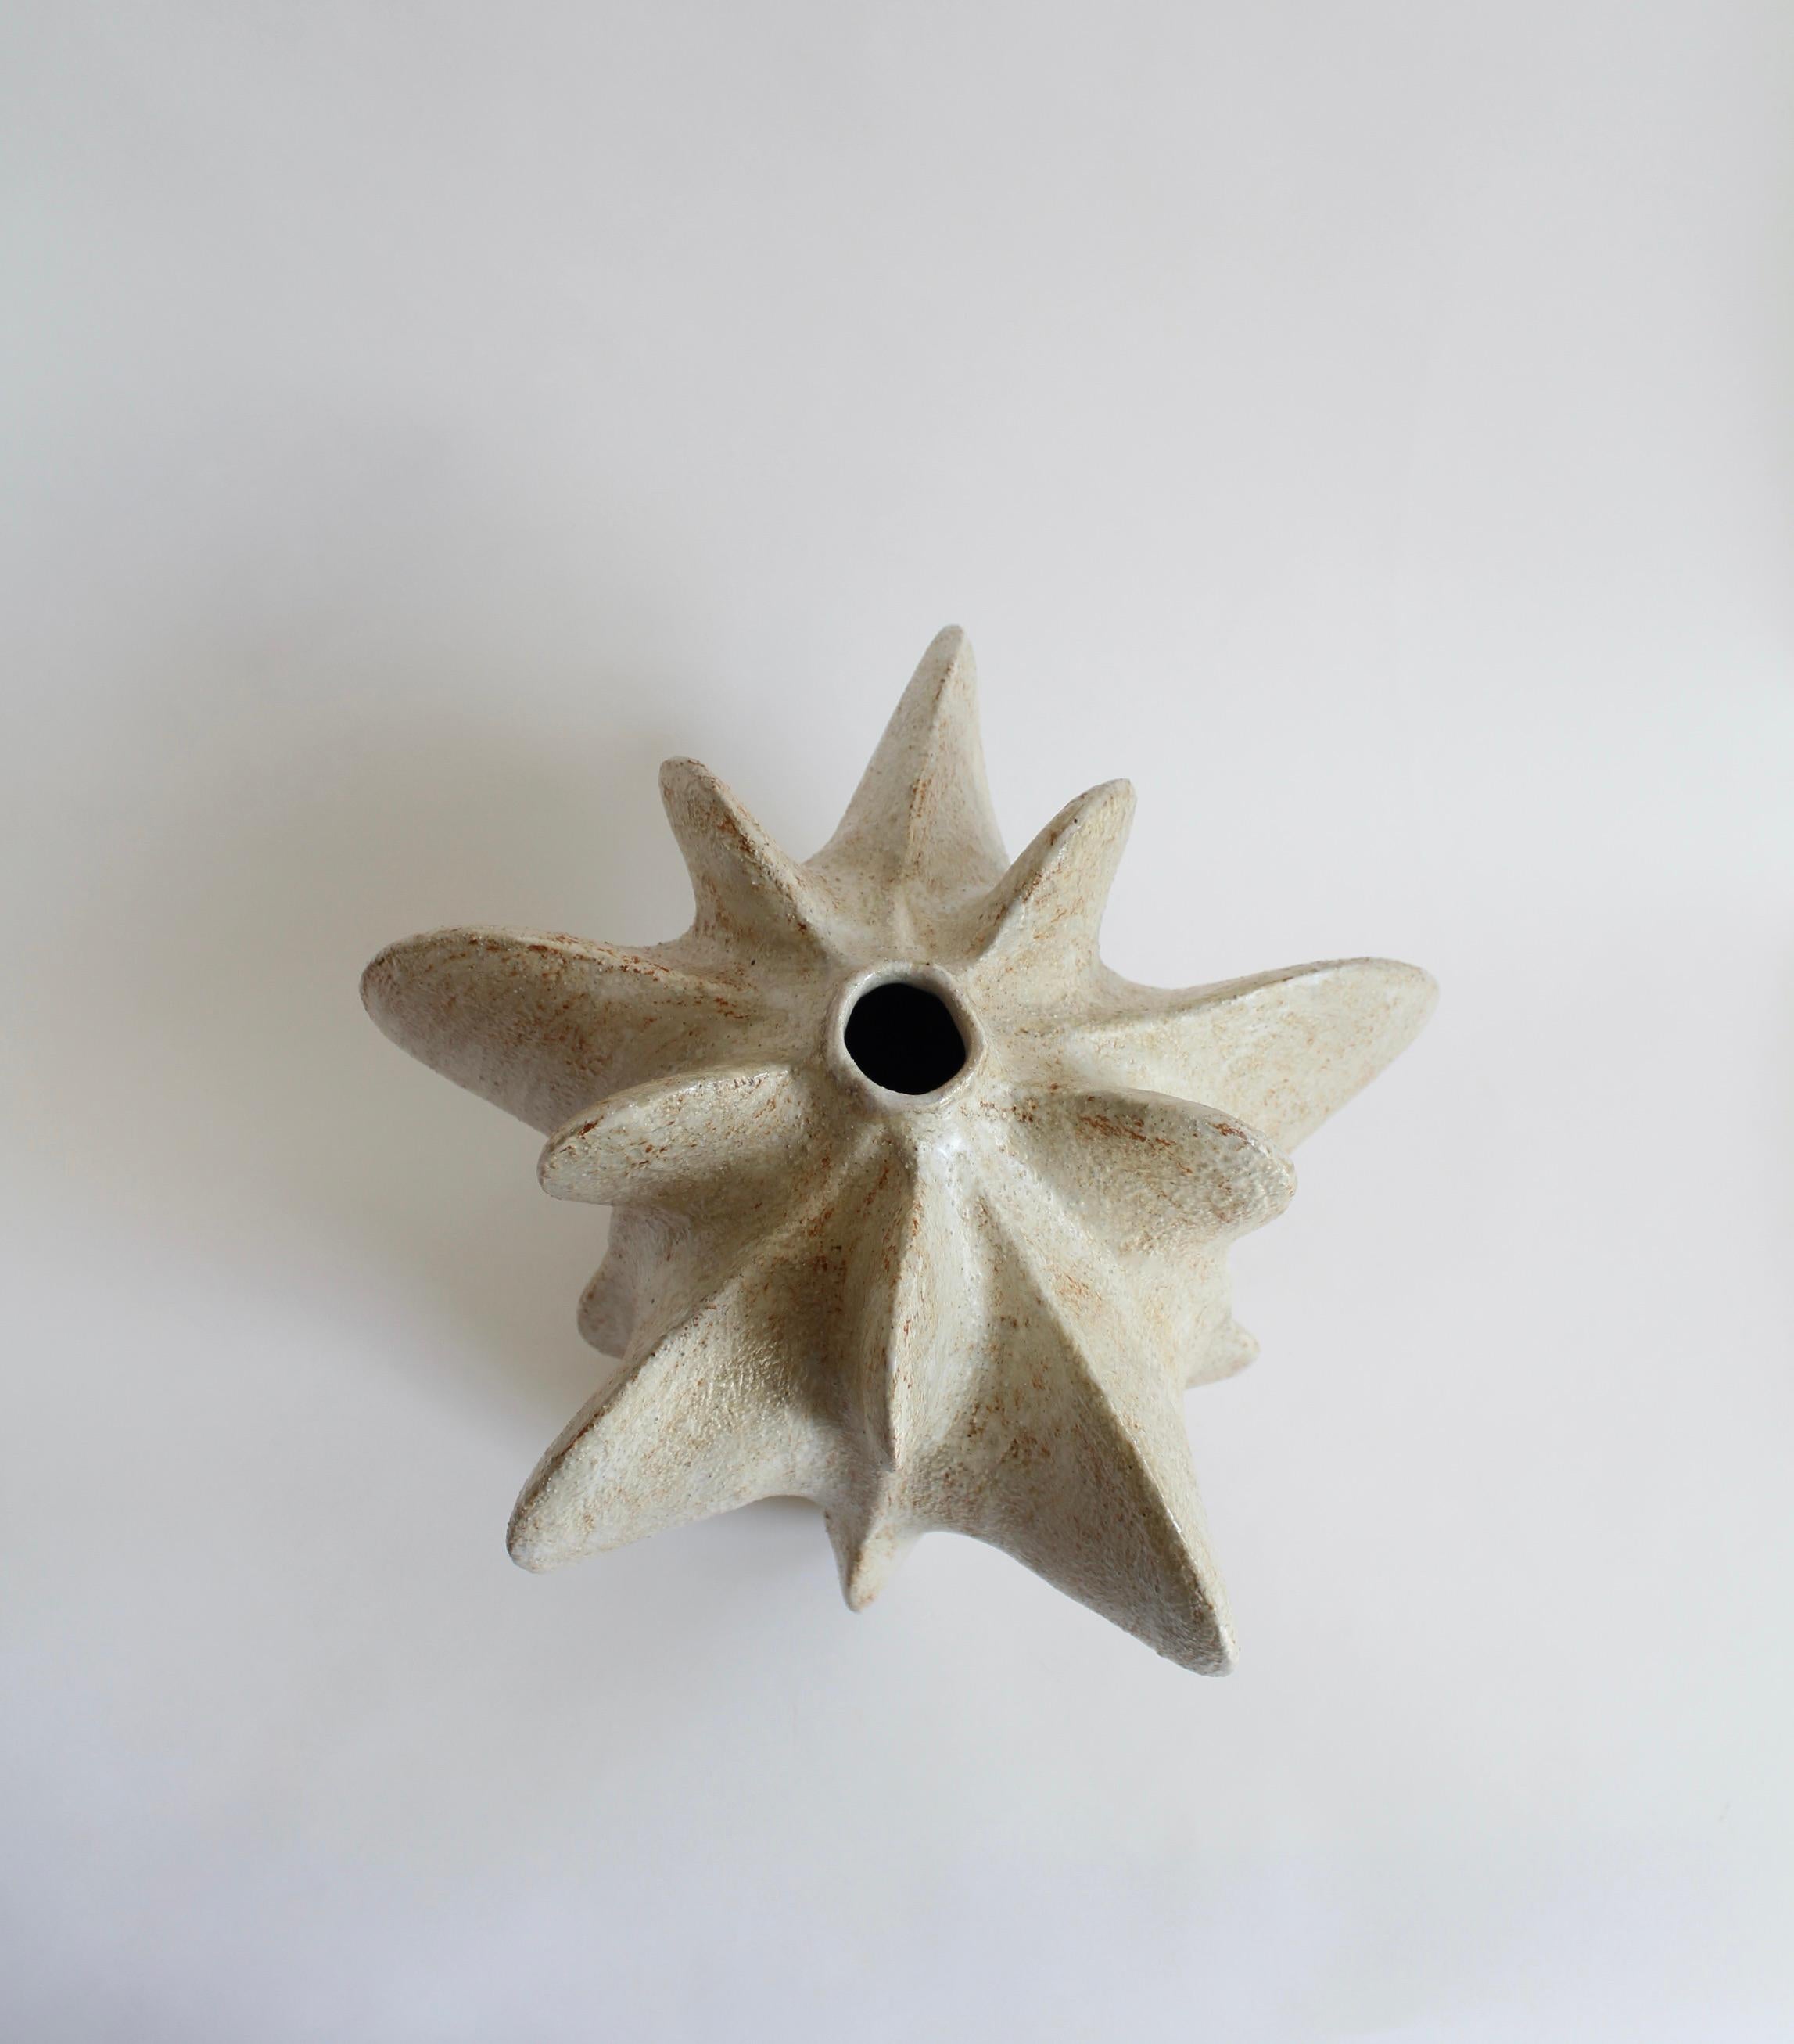 Ivory Petal Gourd IV by Julie Nelson
One Of A Kind
Dimensions: D 34 x H 32 cm
Materials: Ceramic stoneware and porcelain

Artist Julie Nelson uses the materiality of clay as a means to explore naturally occurring patterns and